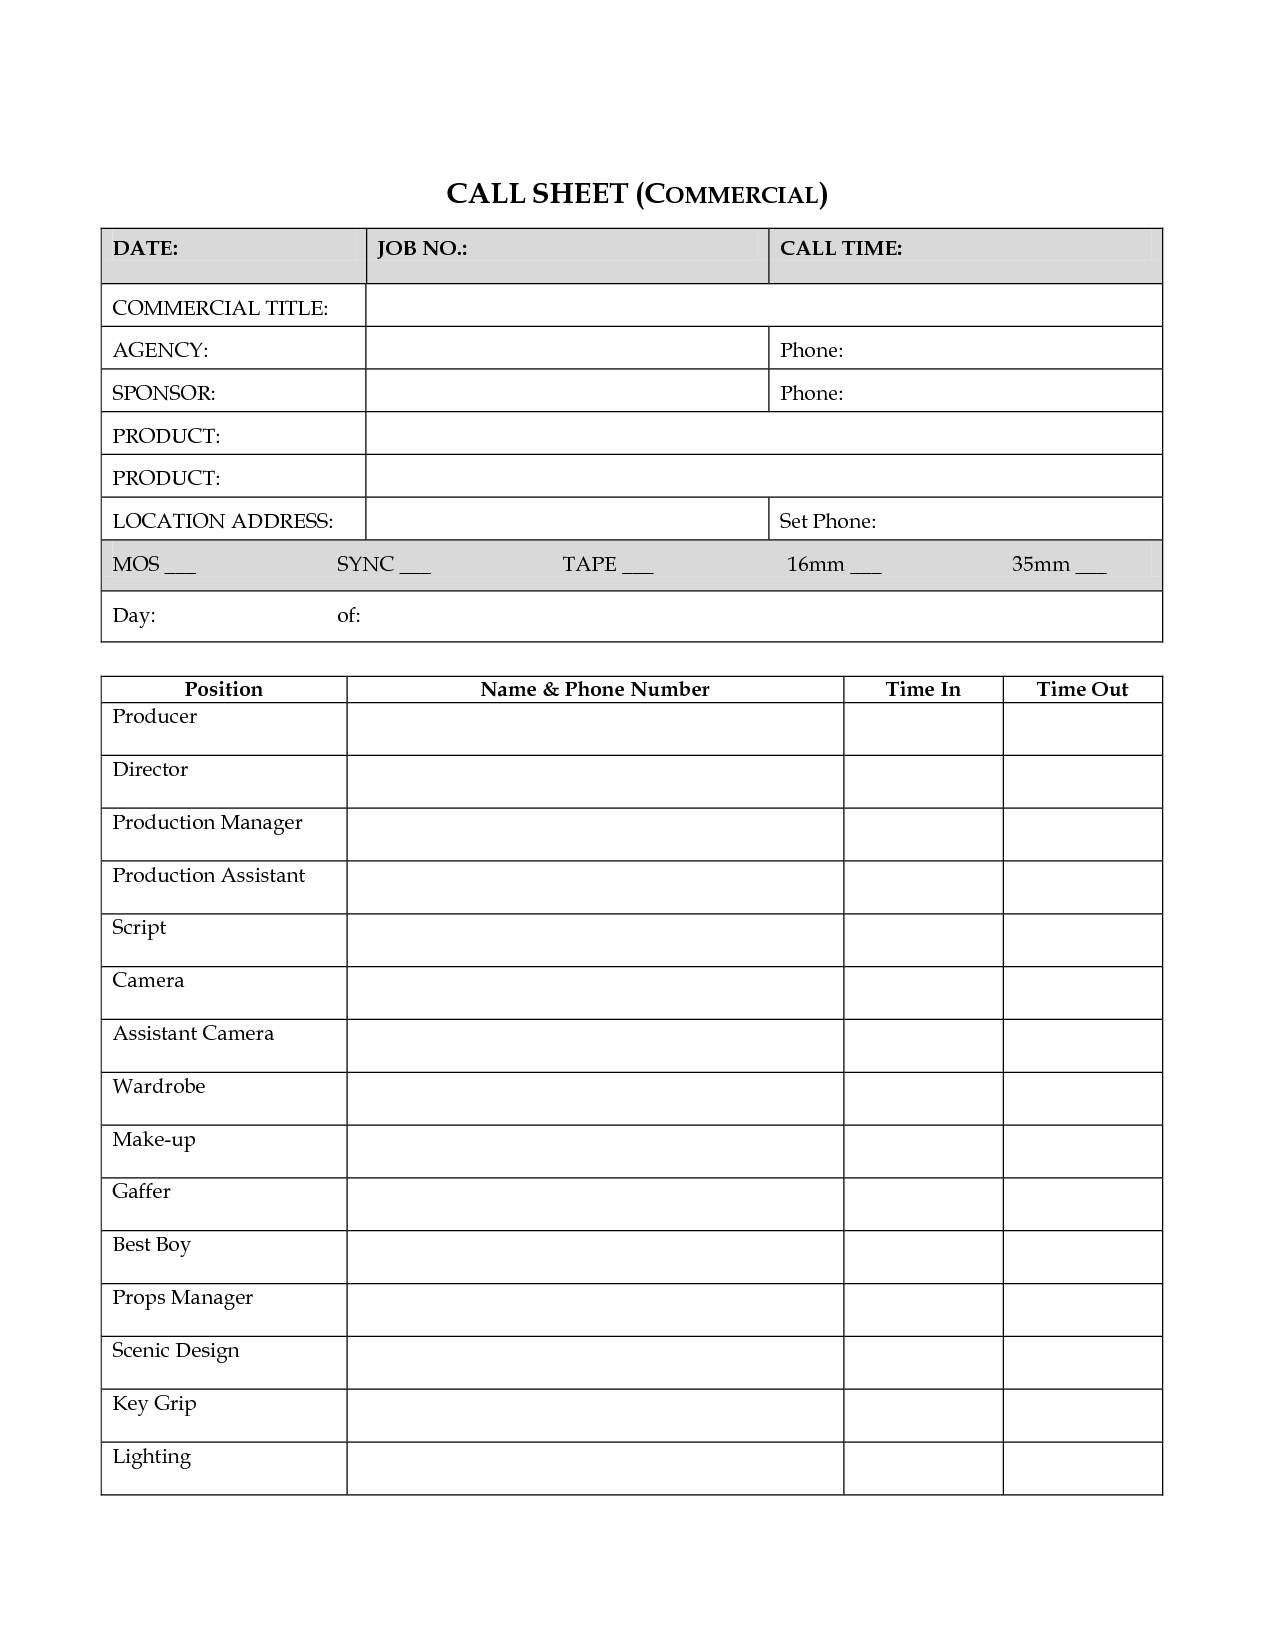 Terrific Call Sheet Template Sample For Commercial With Film Call Sheet Template Word